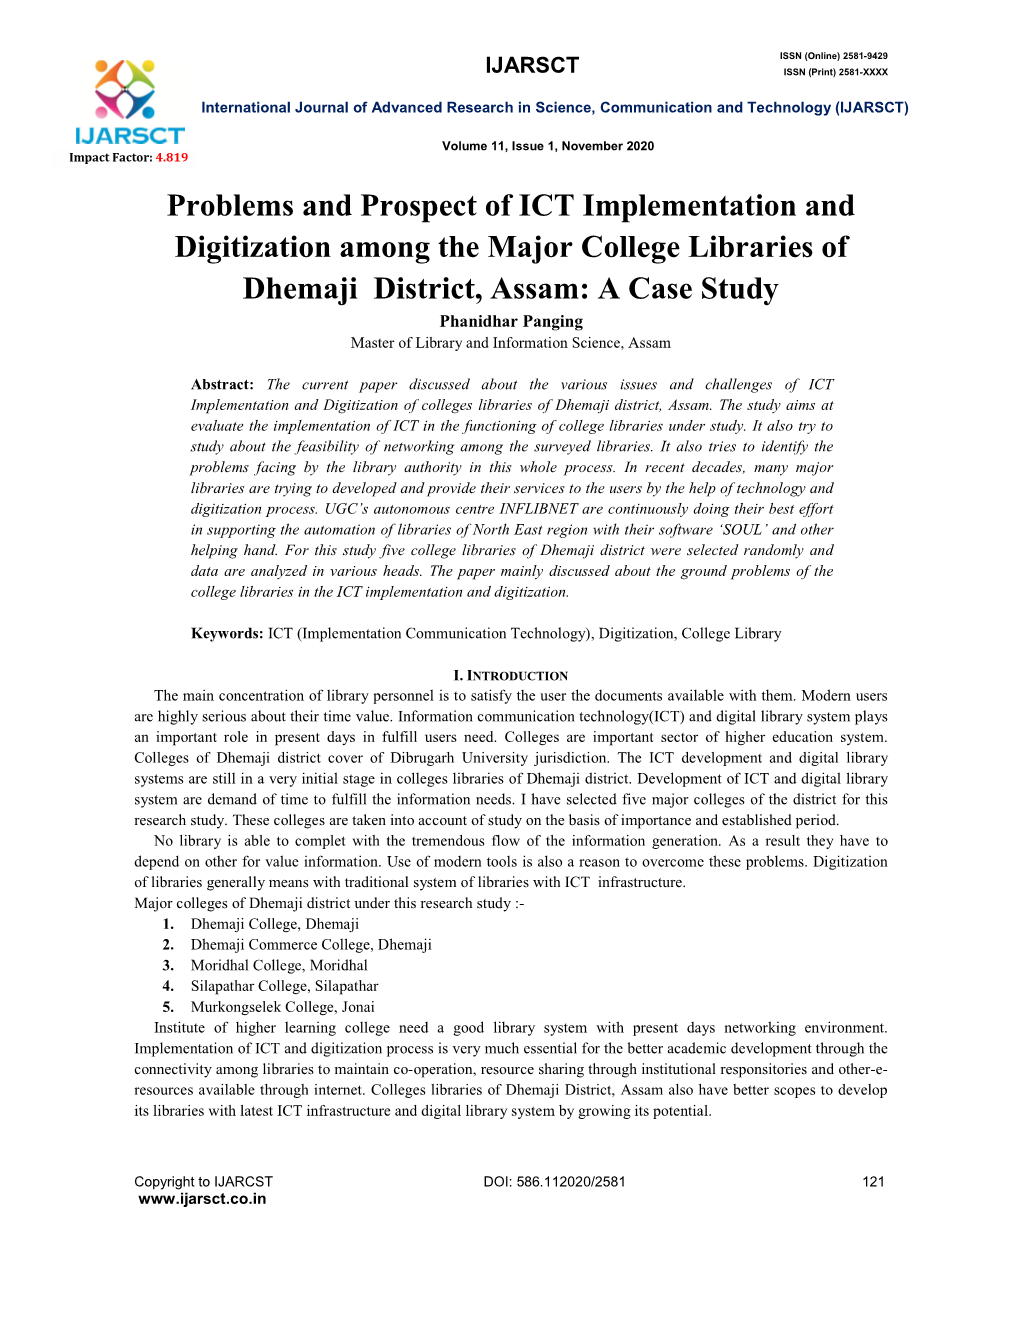 Problems and Prospect of ICT Implementation and Digitization